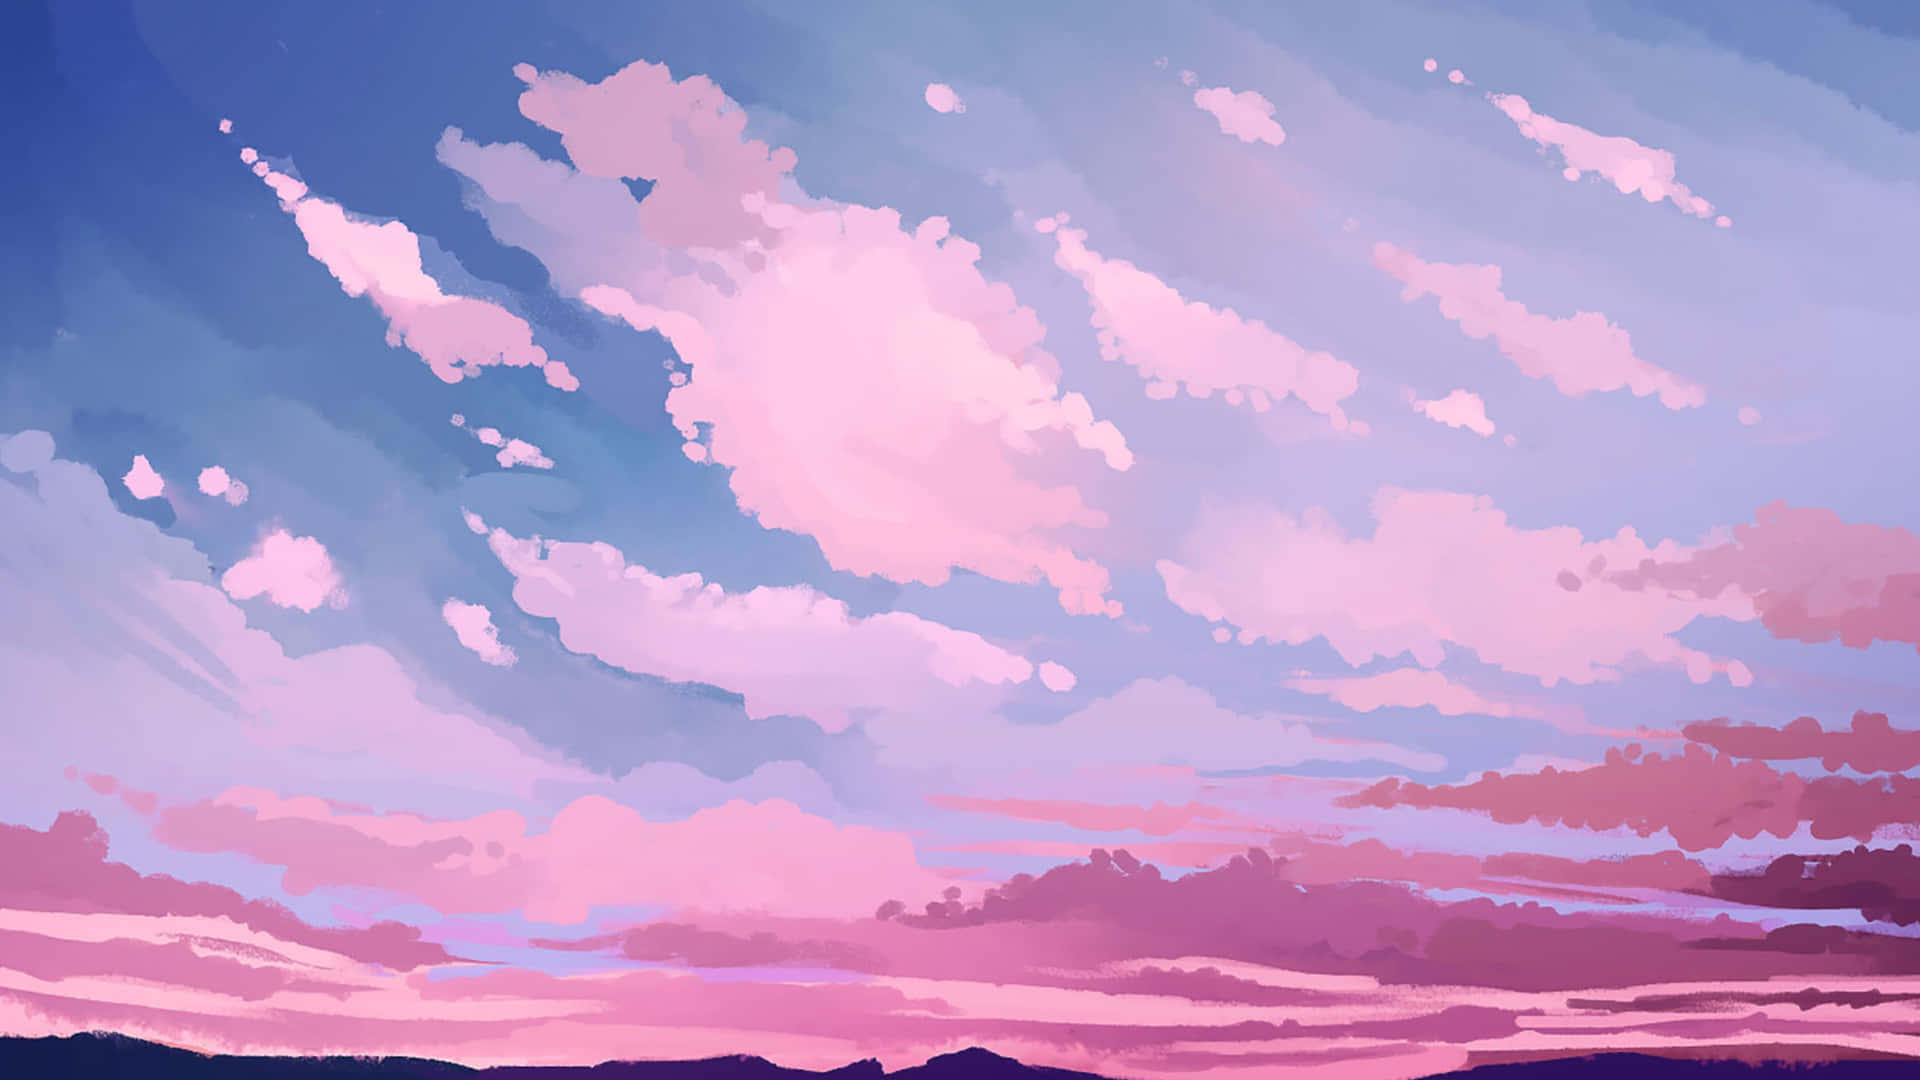 A Painting Of A Sunset With Pink Clouds